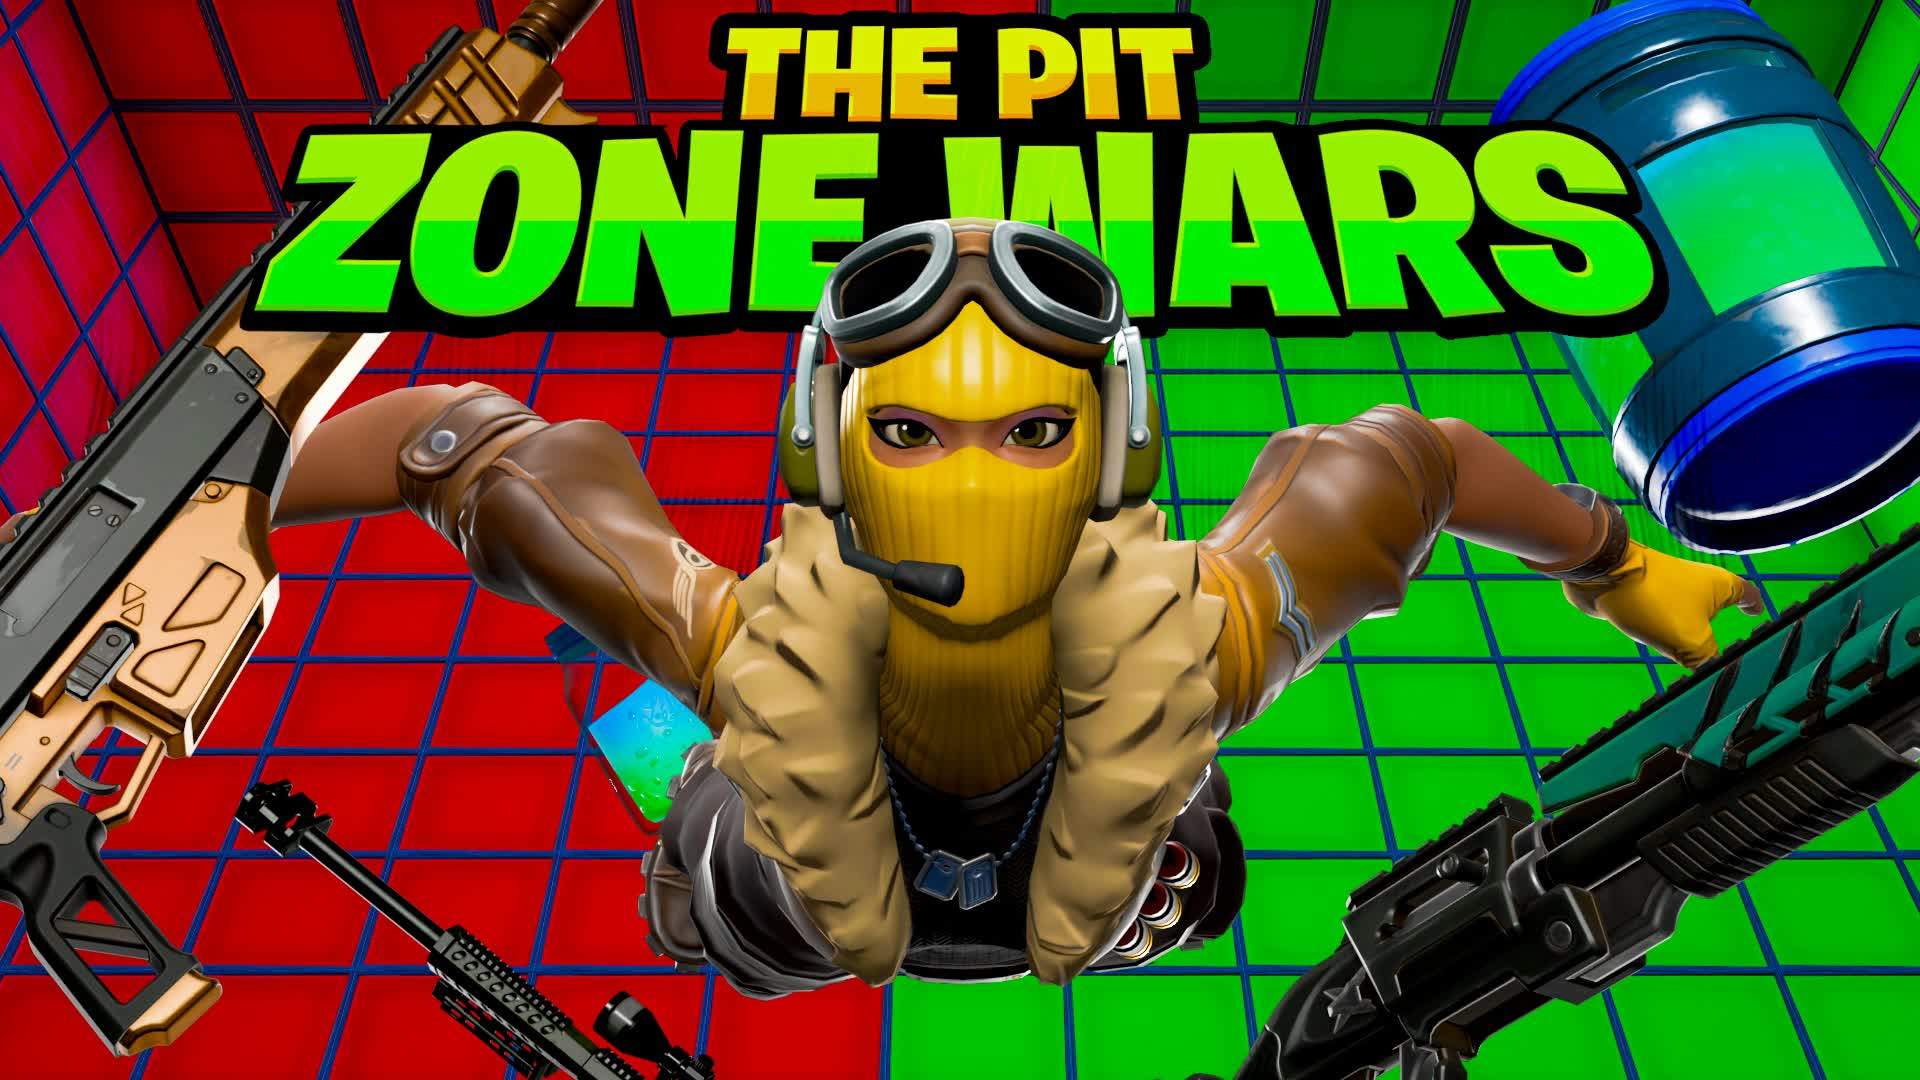 The Pit Zone Wars😁